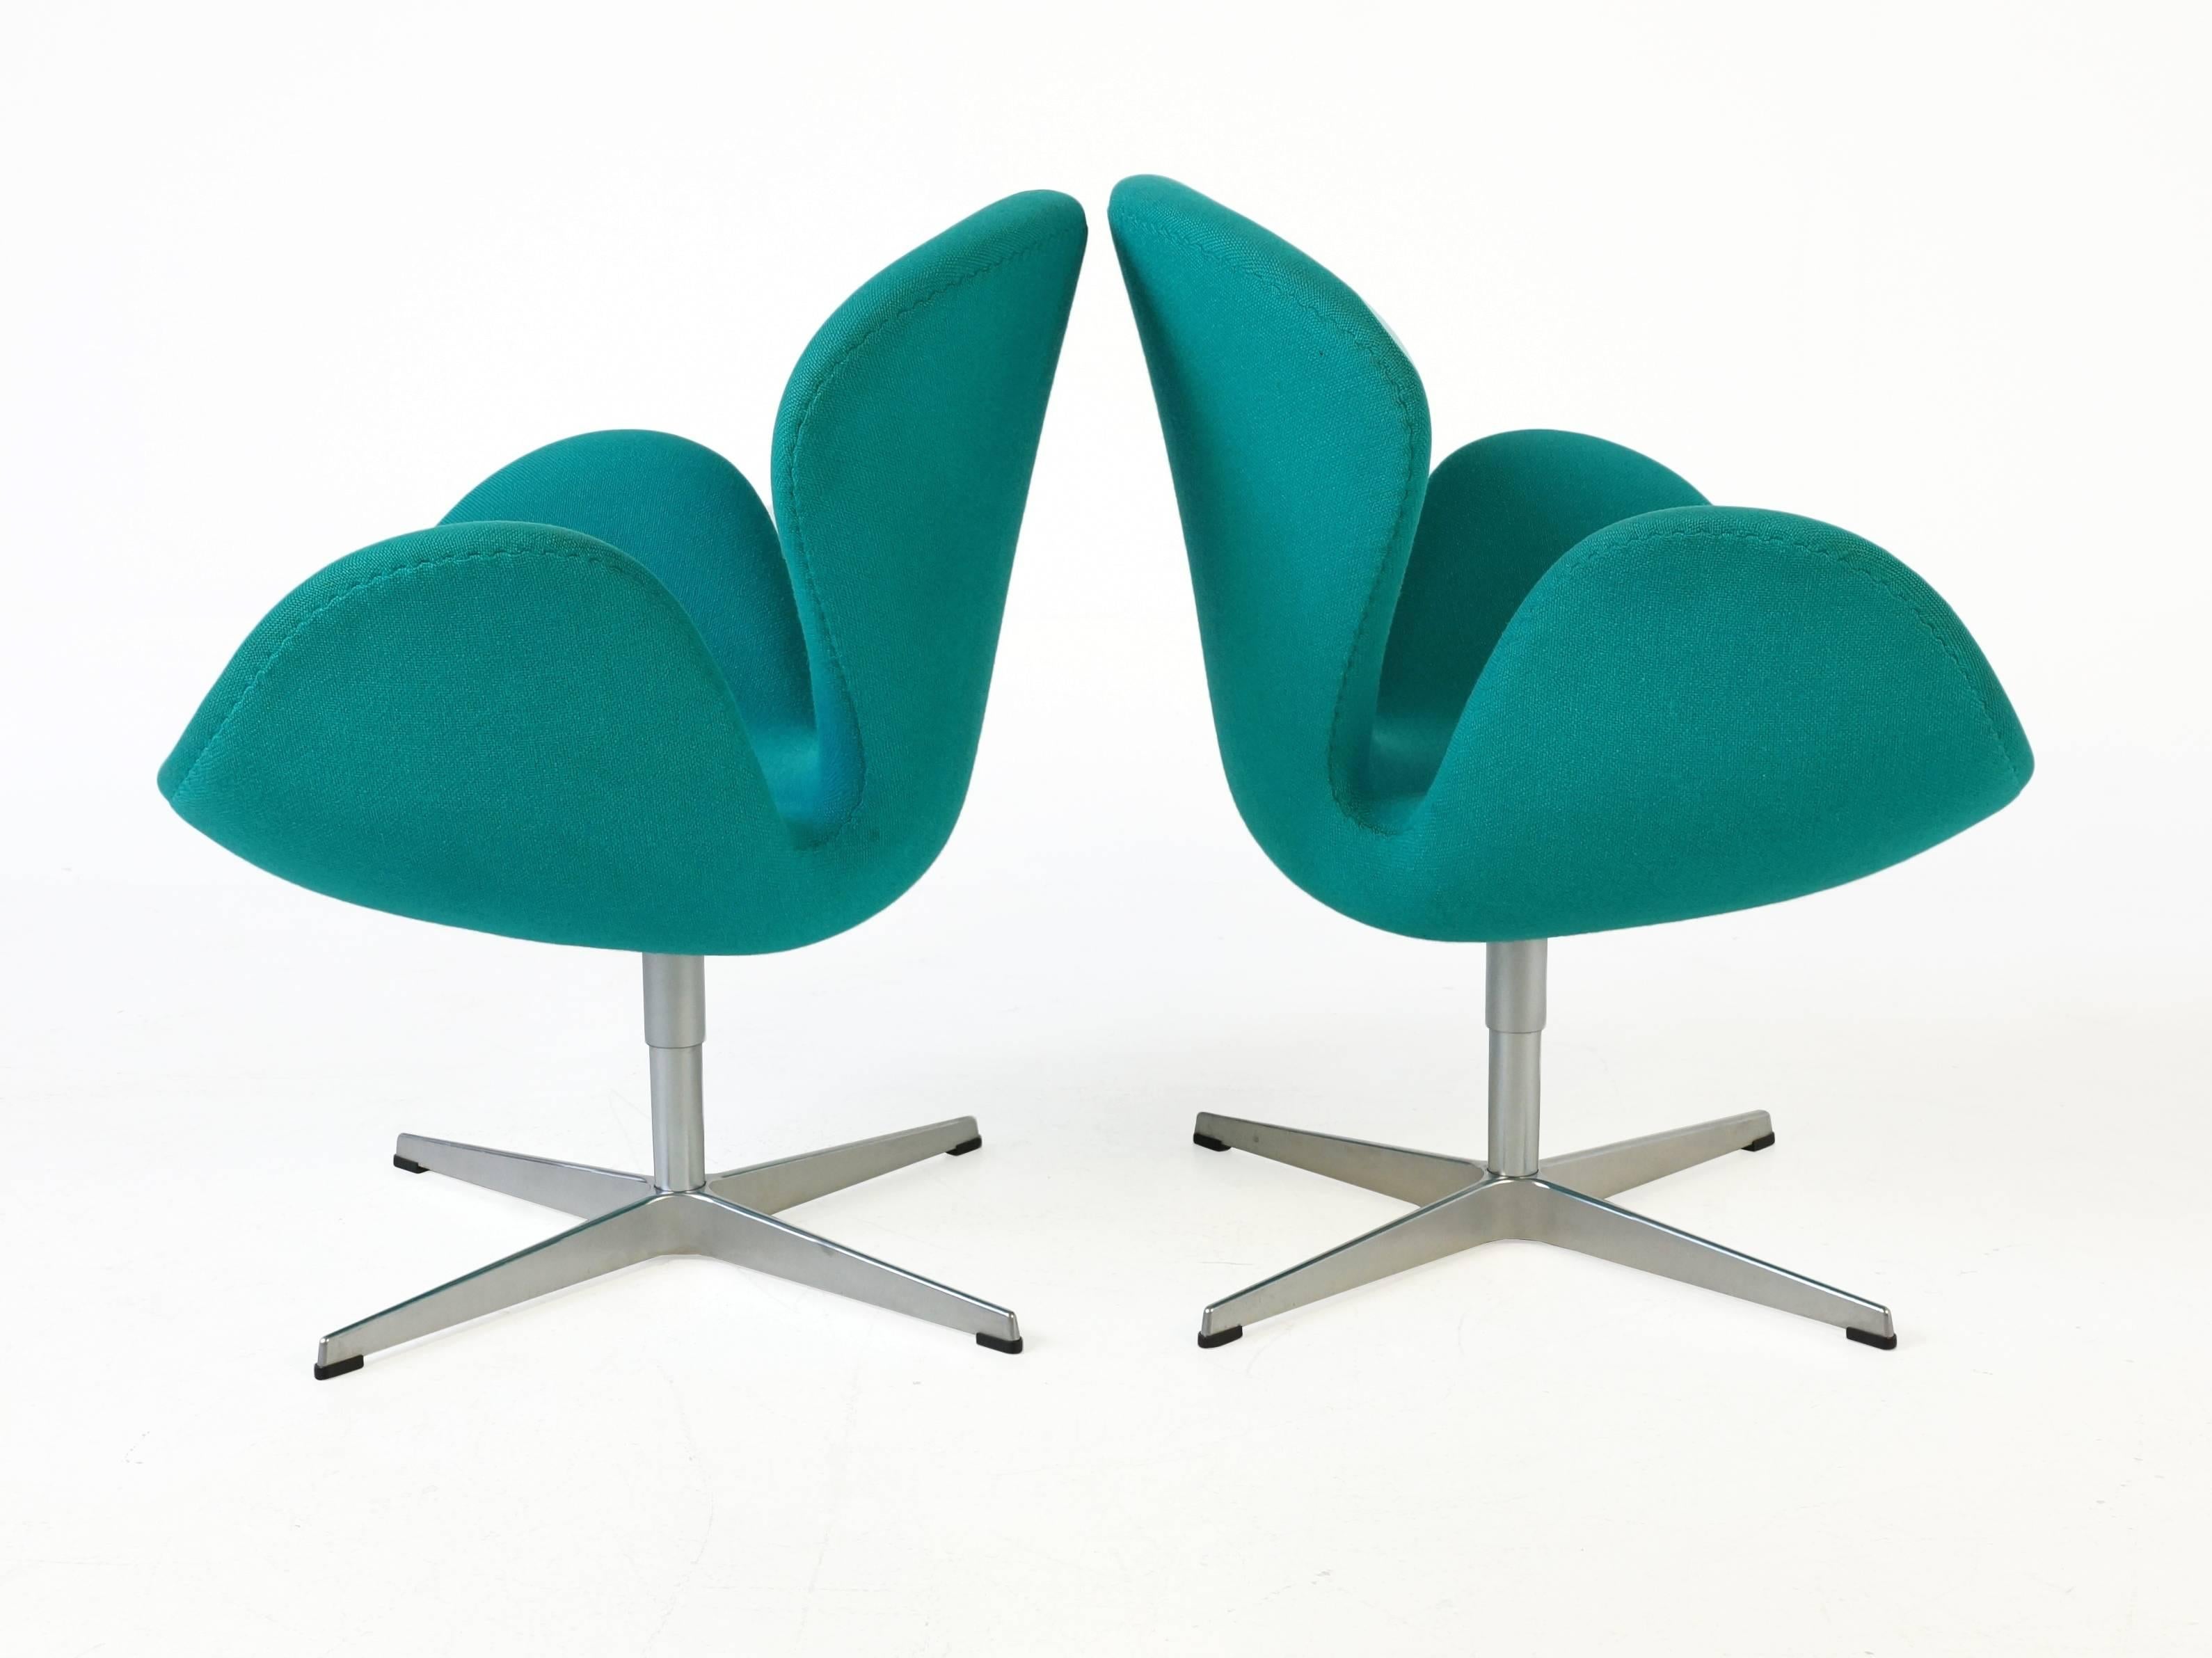 Pair of turquoise swan chairs from Arne Jacobsen for Fritz Hansen. The swan chair was designed by Arne Jacobsen in 1958 for the Royal Hotel in Copenhagen the organic curves is close to perfect. The swans have the original fabric in beautiful